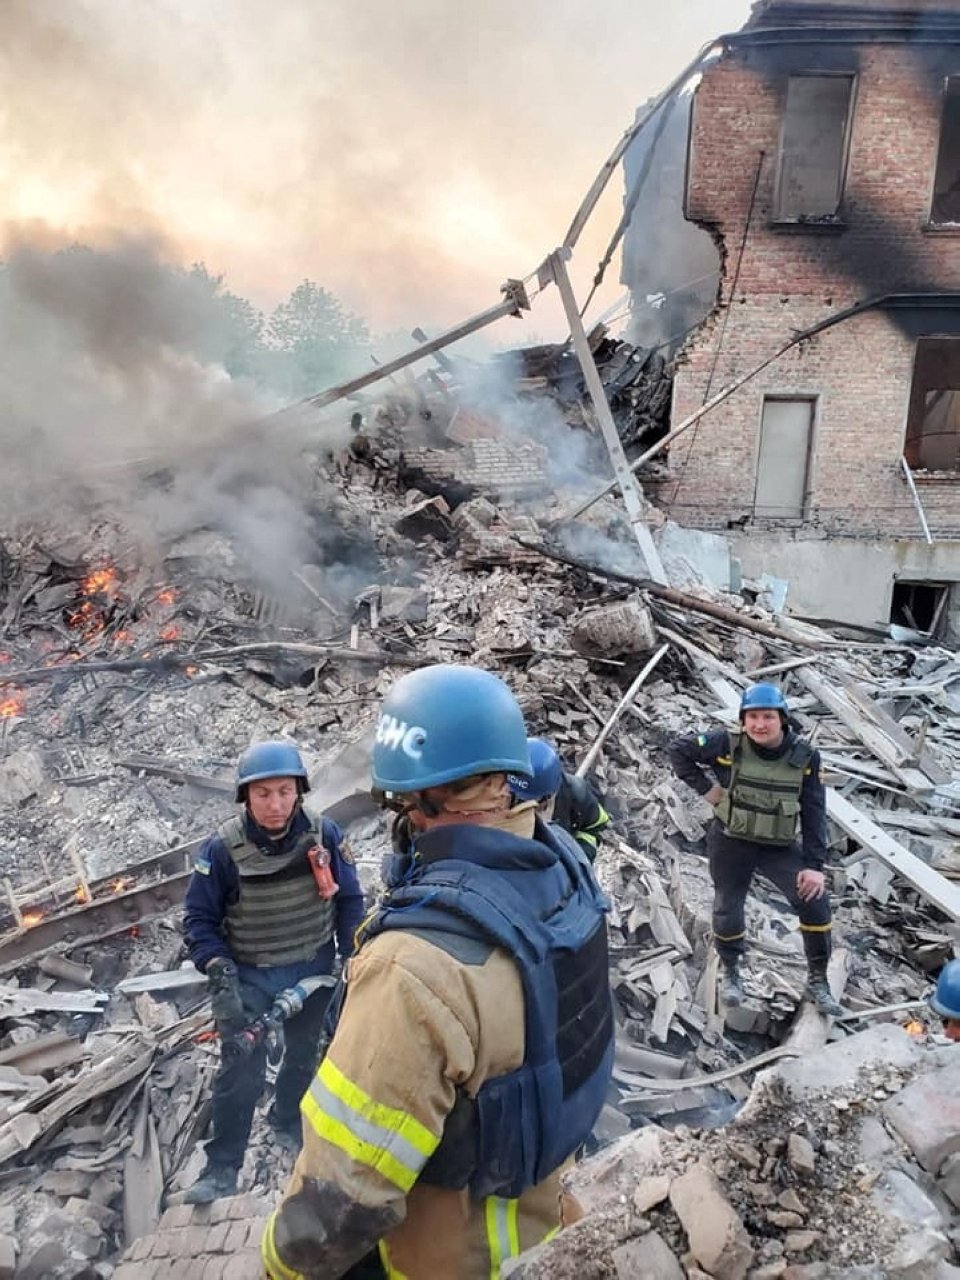 Emergency crew members stand around near burning debris after a school building was hit as a result of shelling, in the village of Bilohorivka, Luhansk, Ukraine, May 7, 2022. (State Emergency Services Handout via Reuters)